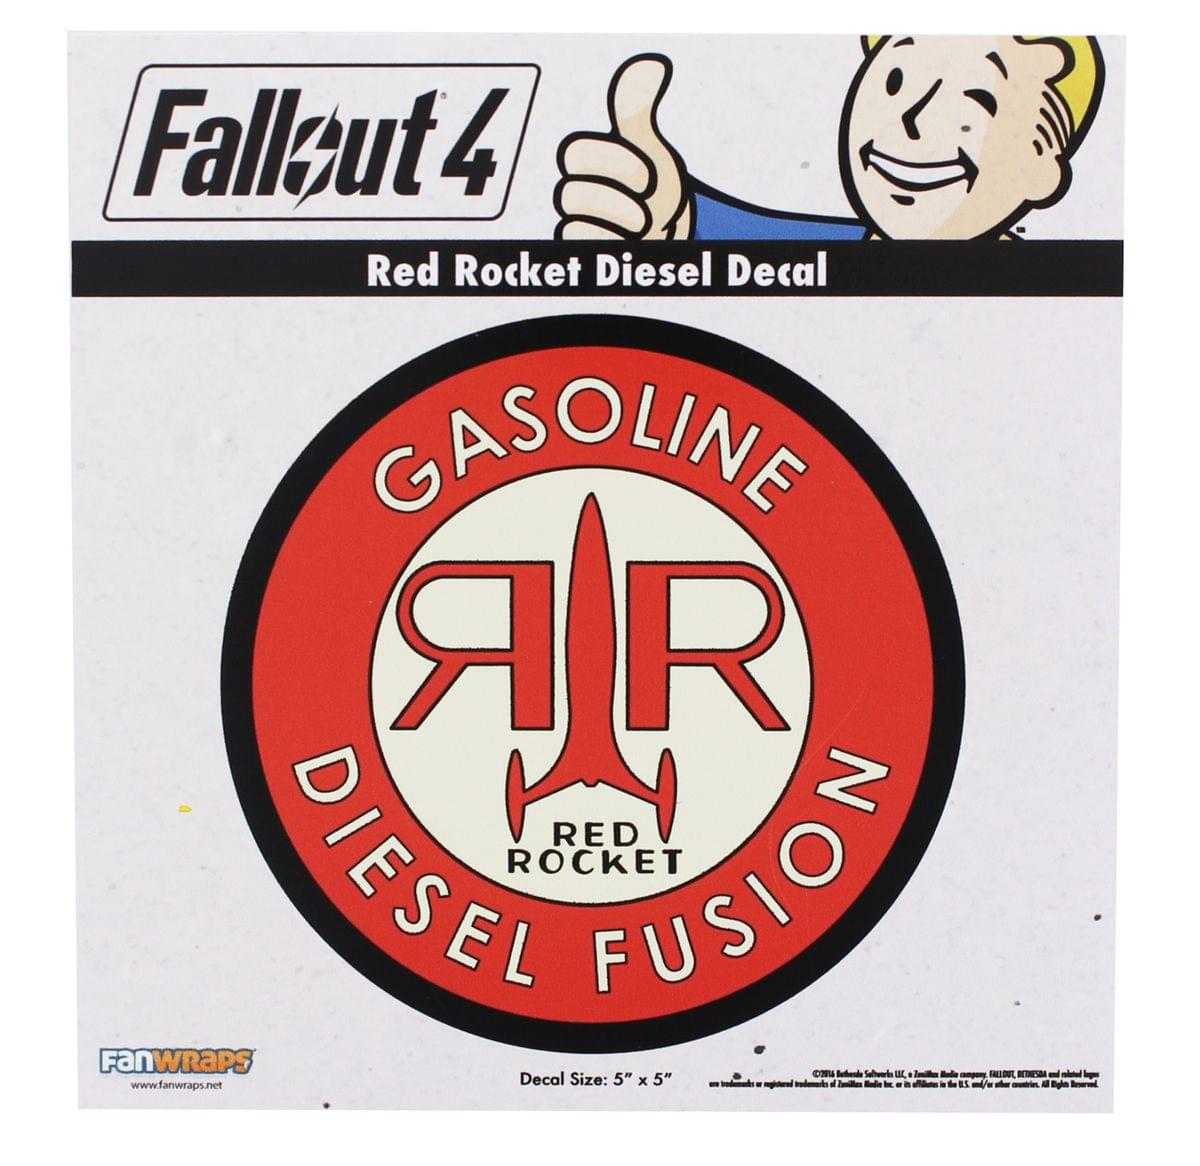 Fallout 4 Red Rocket Diesel Decal